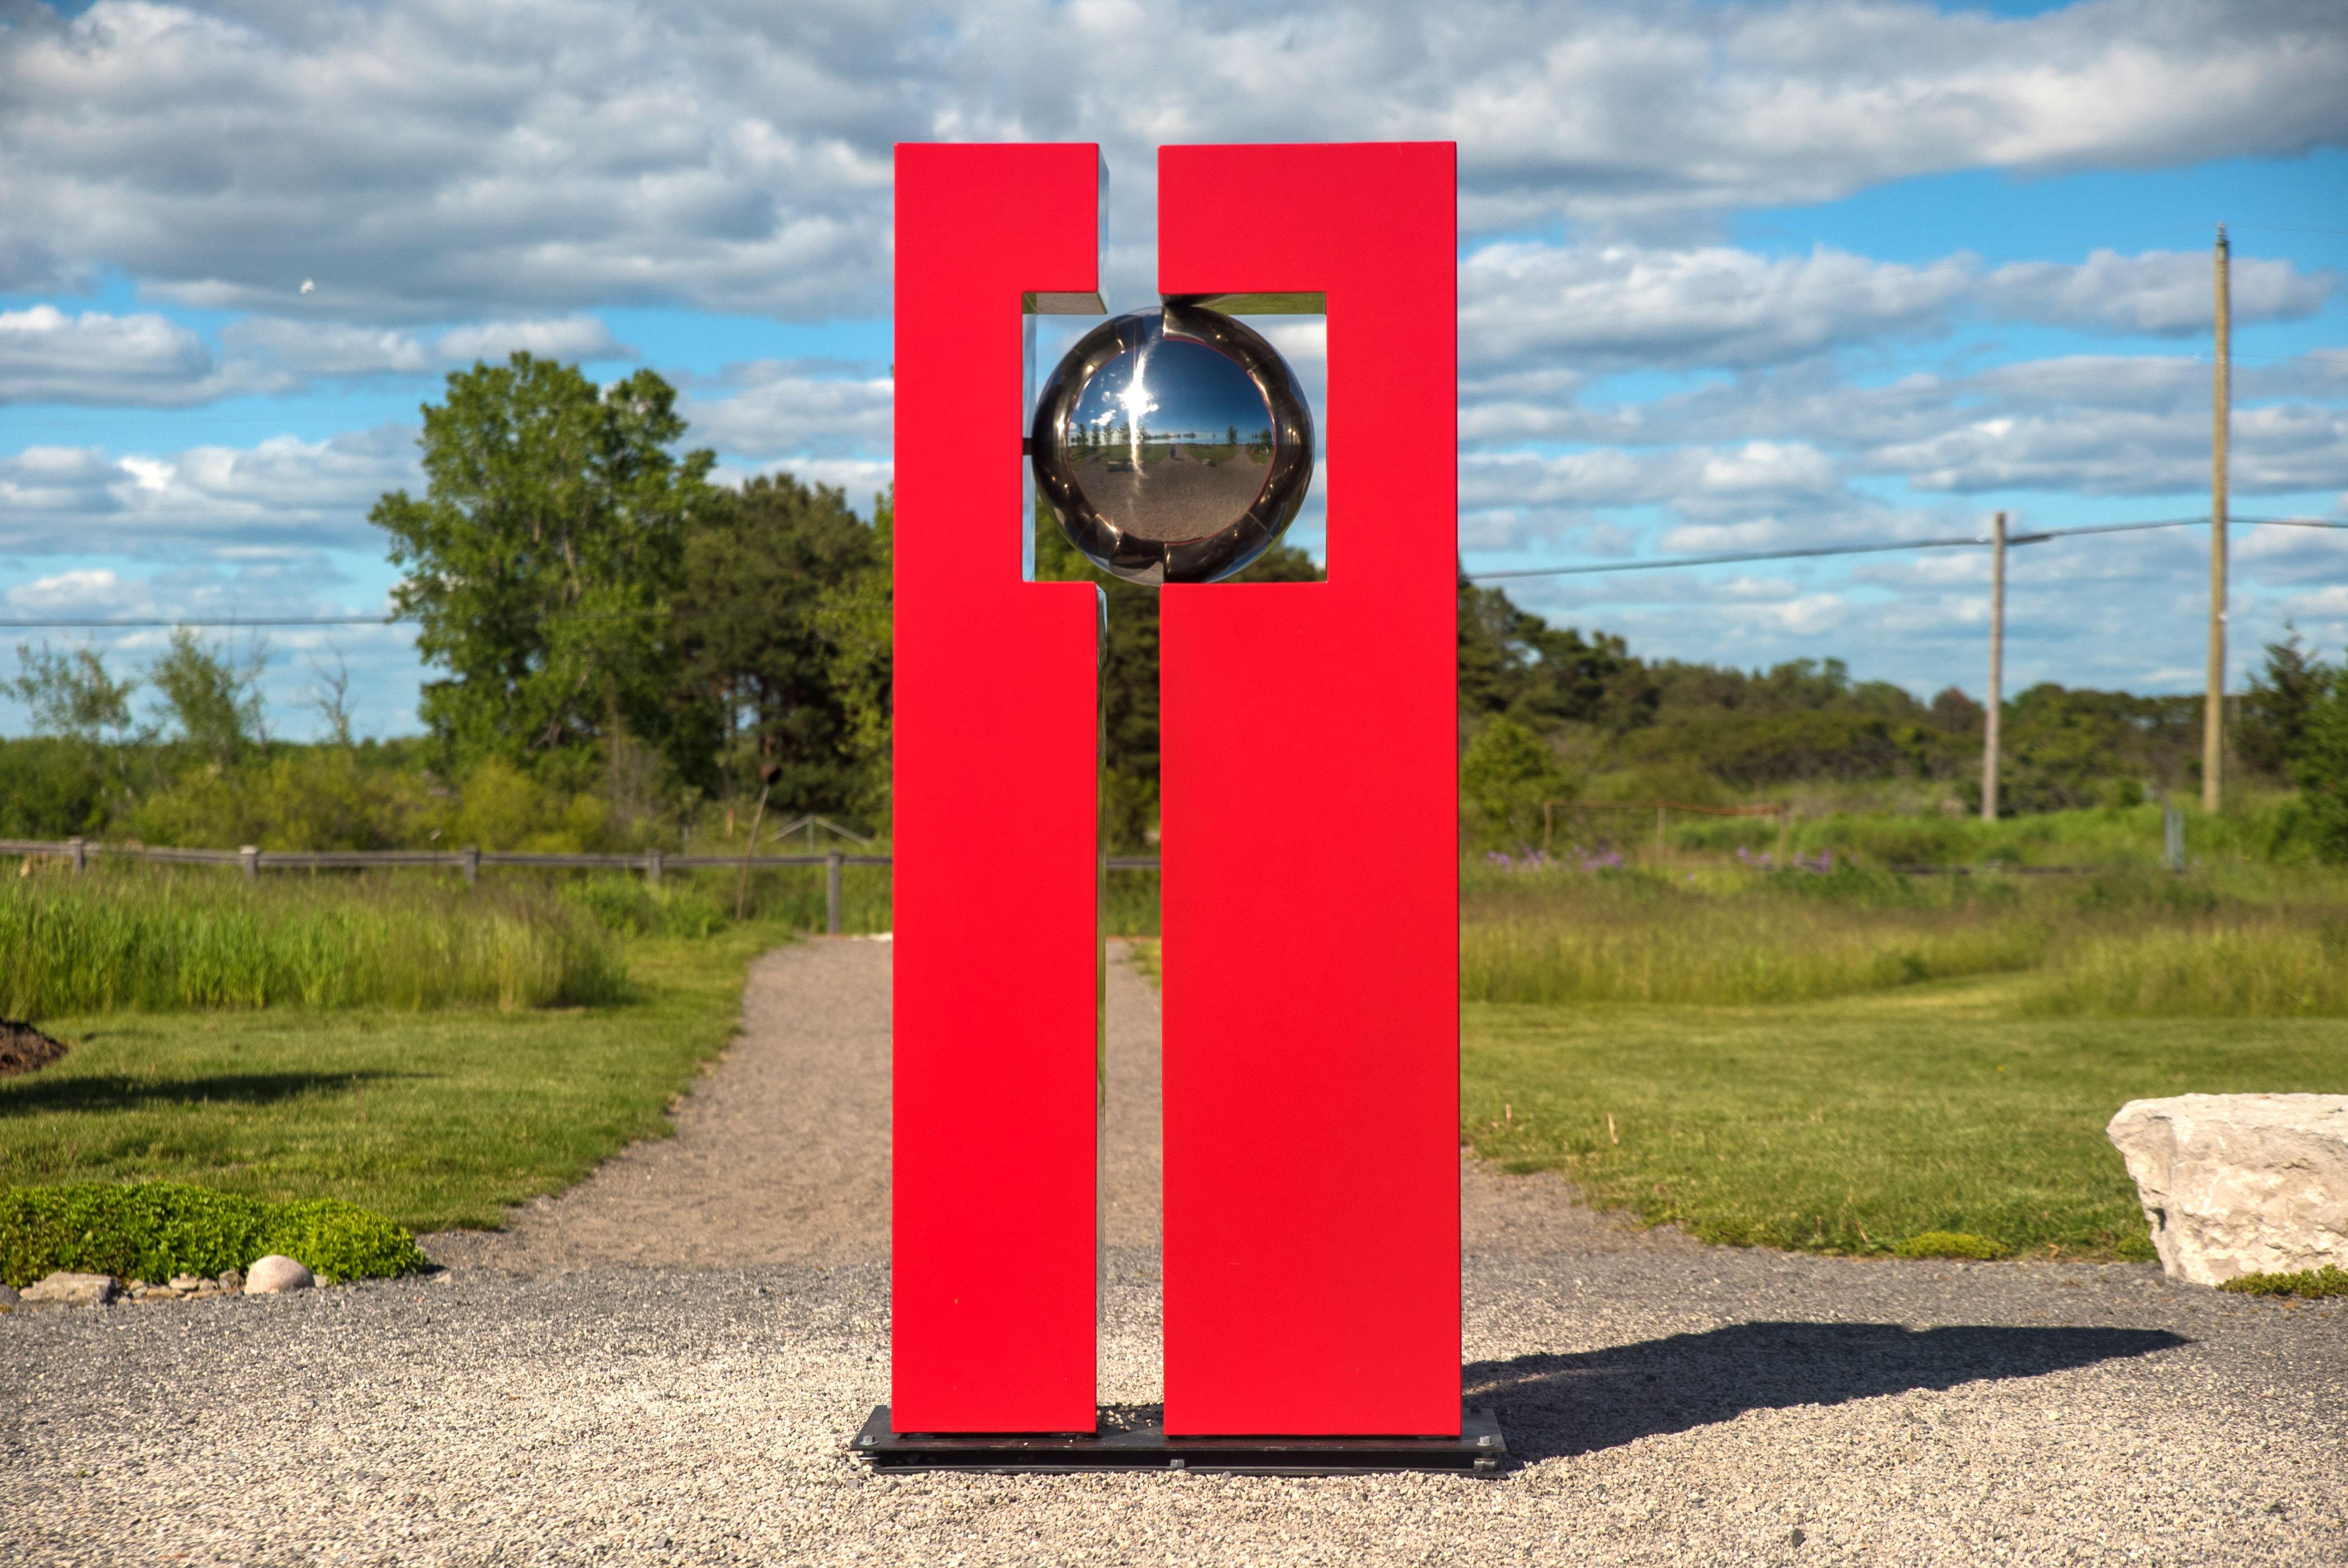 This work is available by commission with 4 to 6 weeks required before delivery. It is edition 9 of 10. 

There are also versions available in sizes up to 10 feet, with multiple spheres, and finishes in red, black or brown. 

A polished stainless